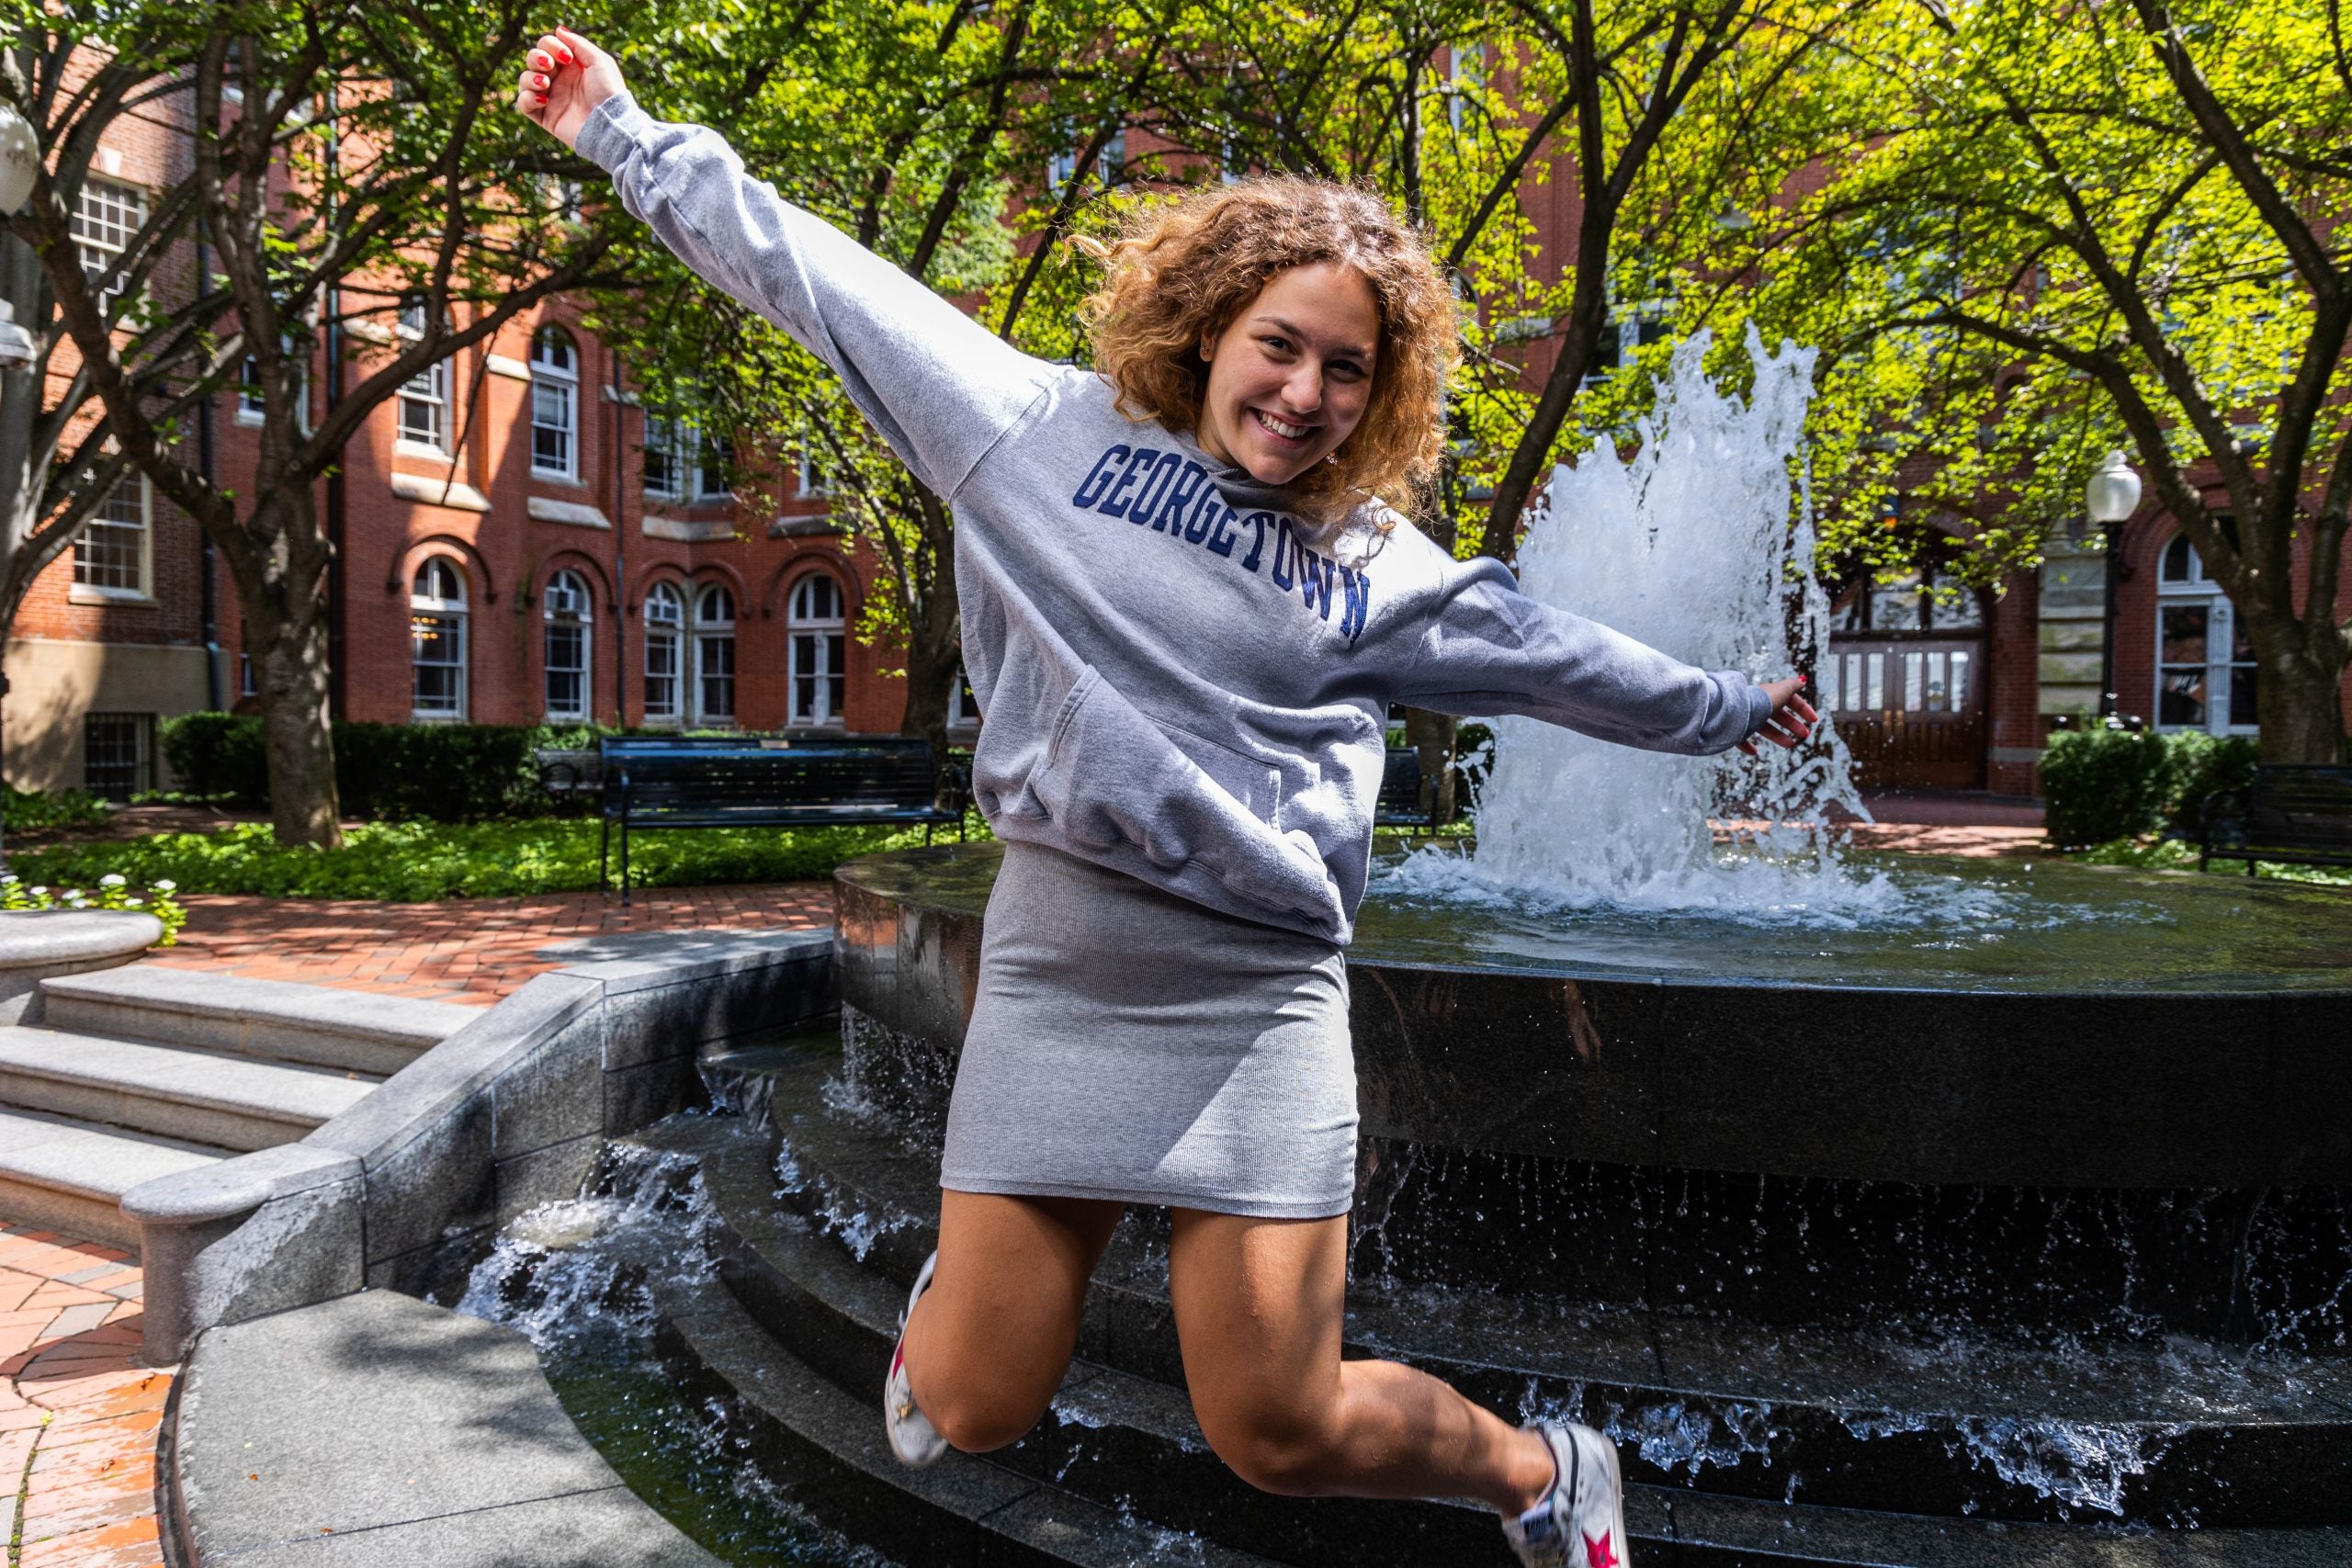 Young woman wearing a gray Georgetown sweatshirt and skirt jumps in front of a fountain